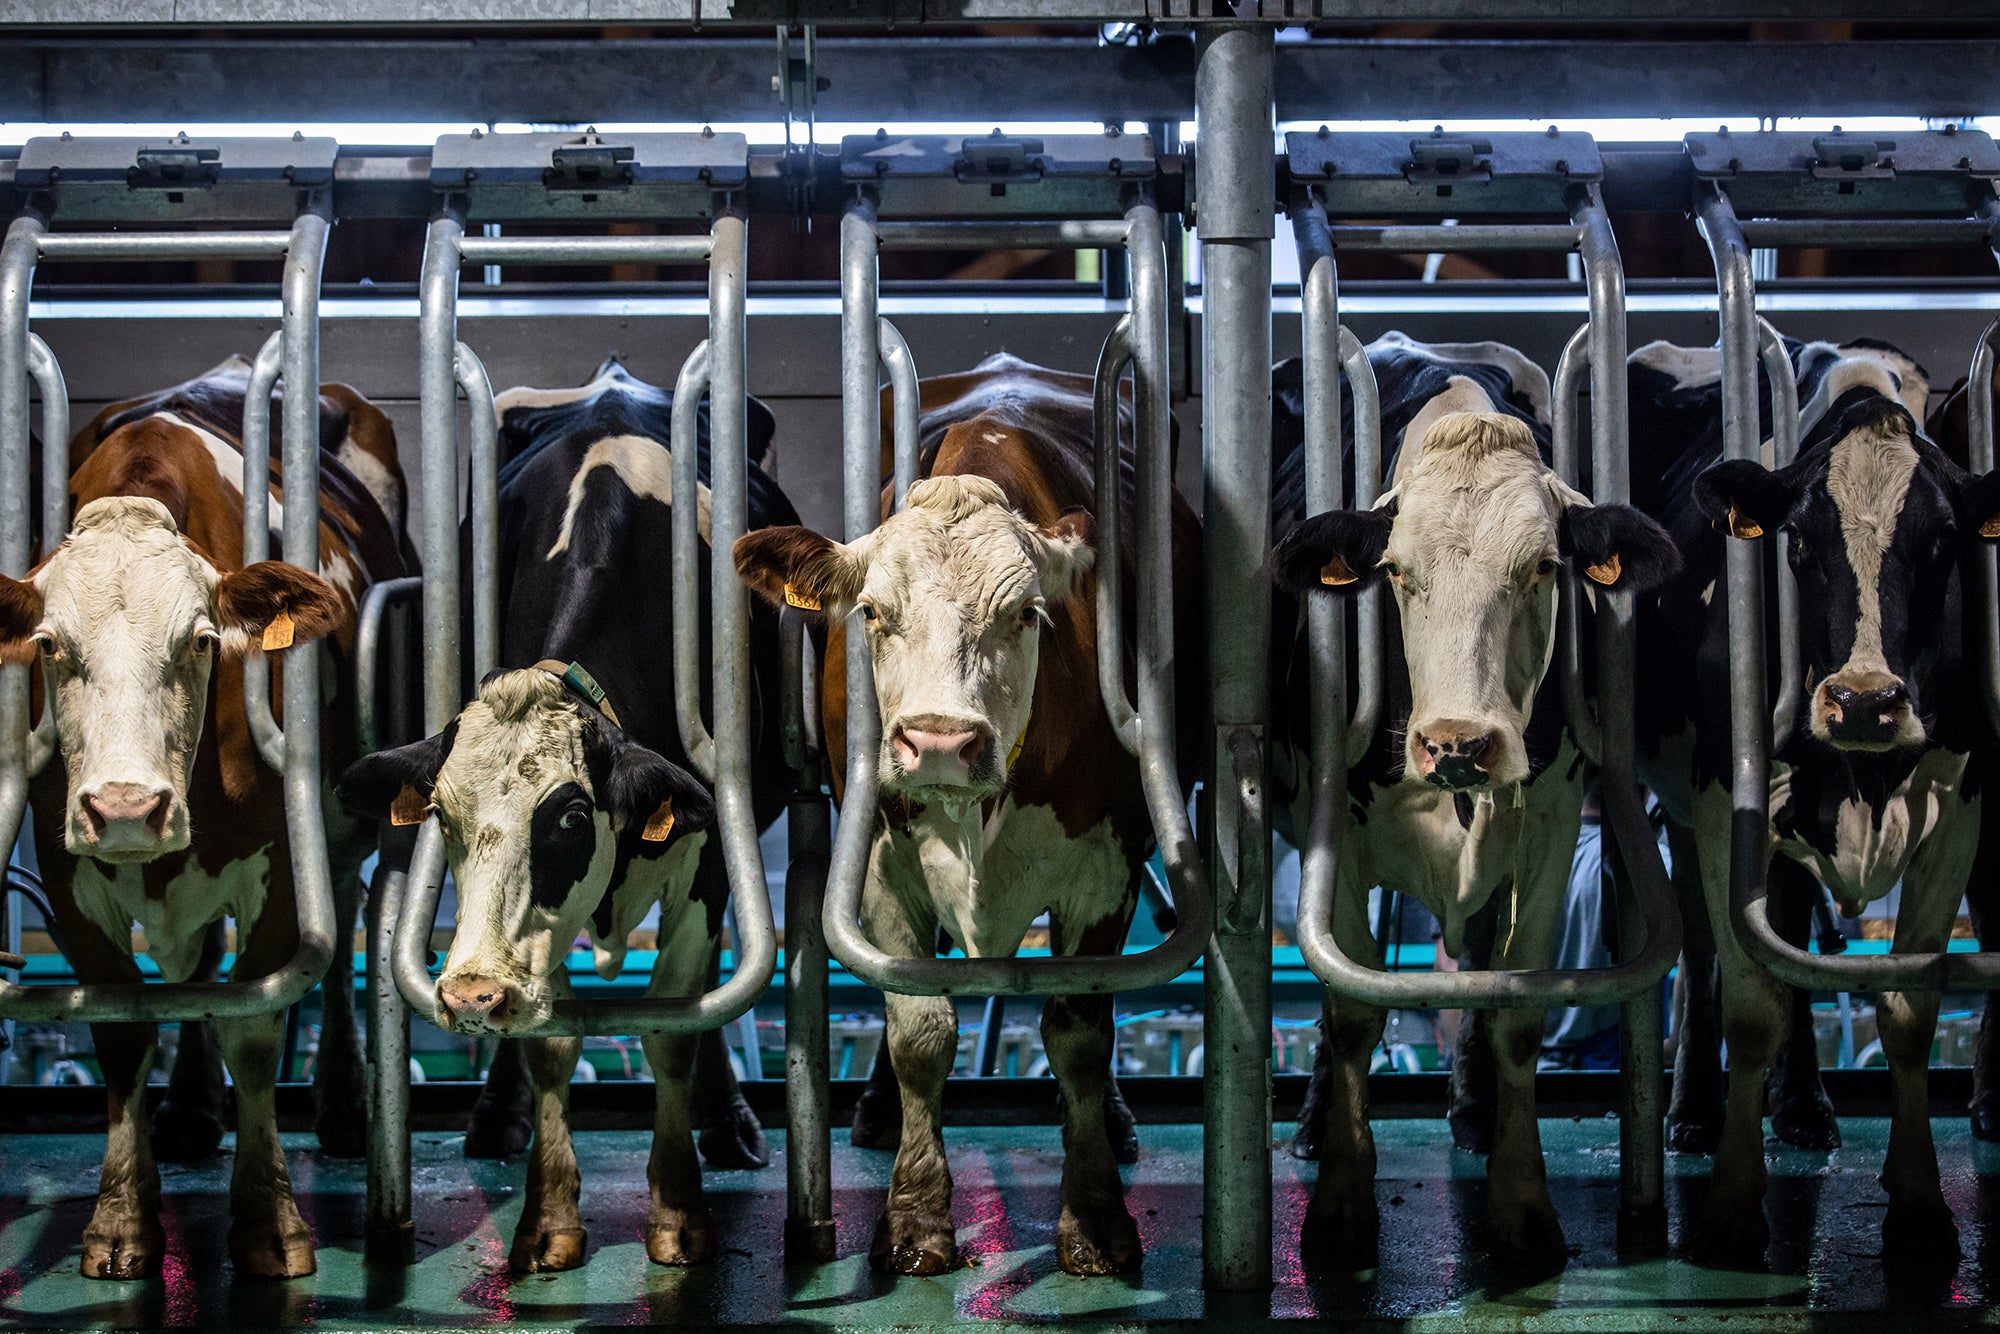 Dairy cows lined up in the milking area at a farm